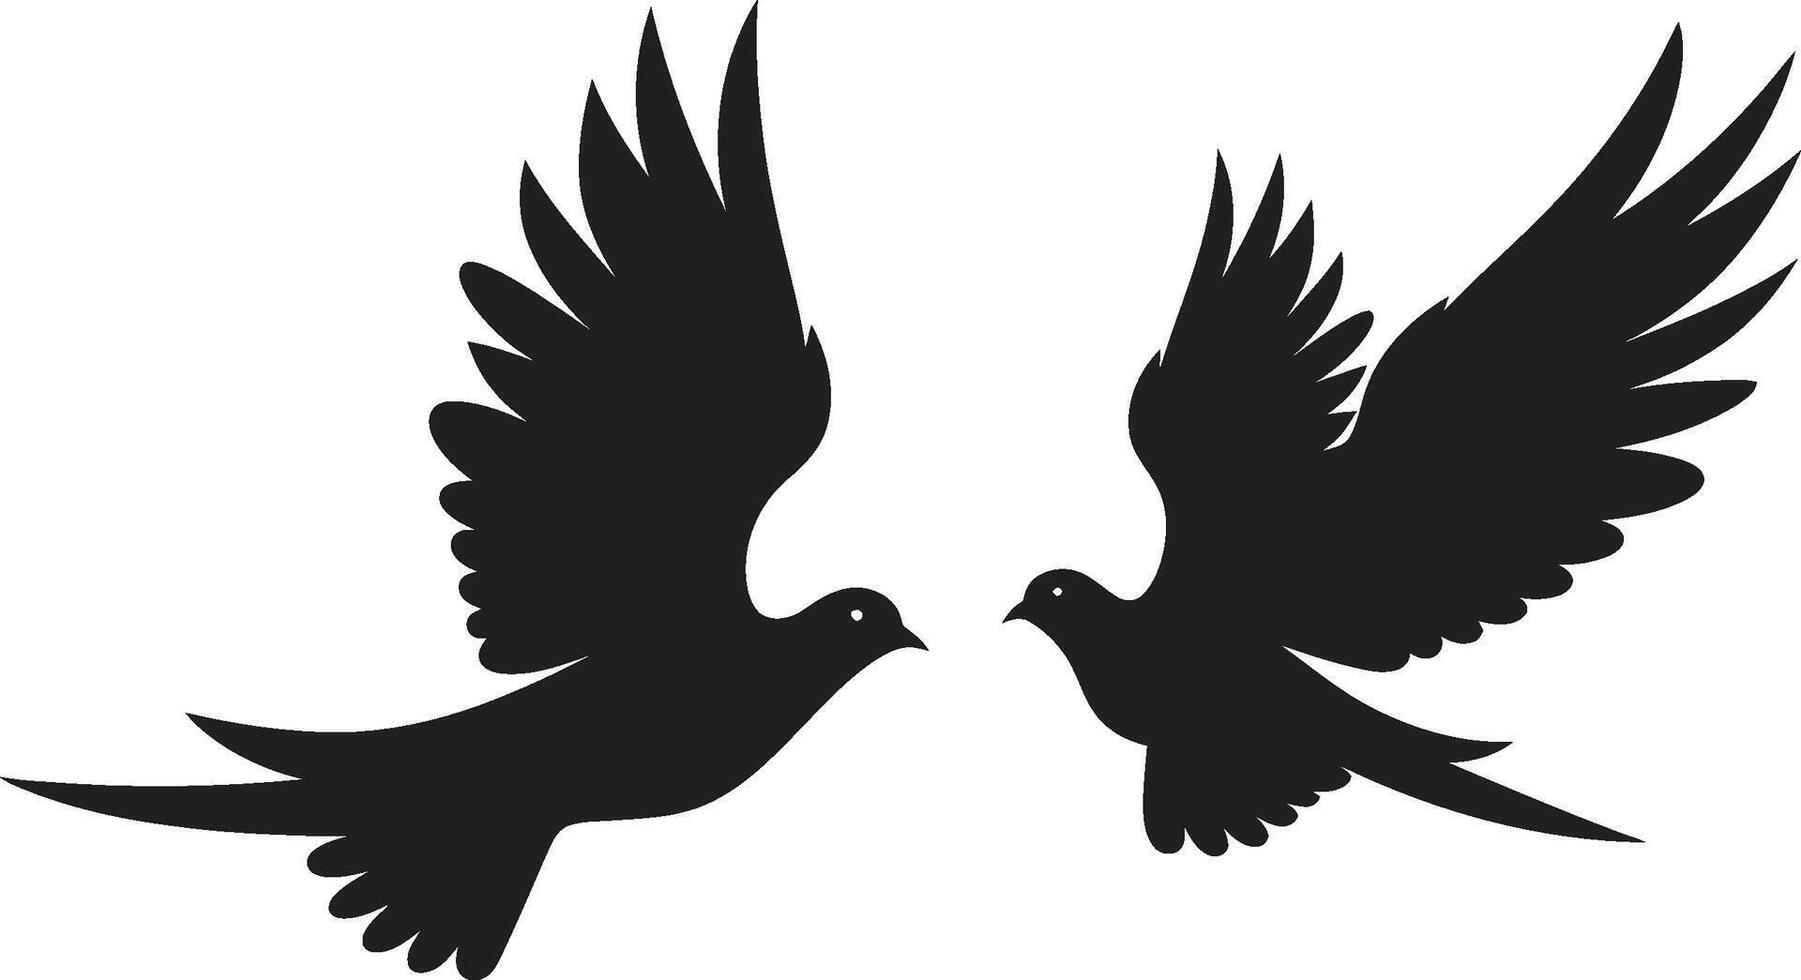 Winged Serenity of a Dove Pair Loving Flight Dove Pair vector